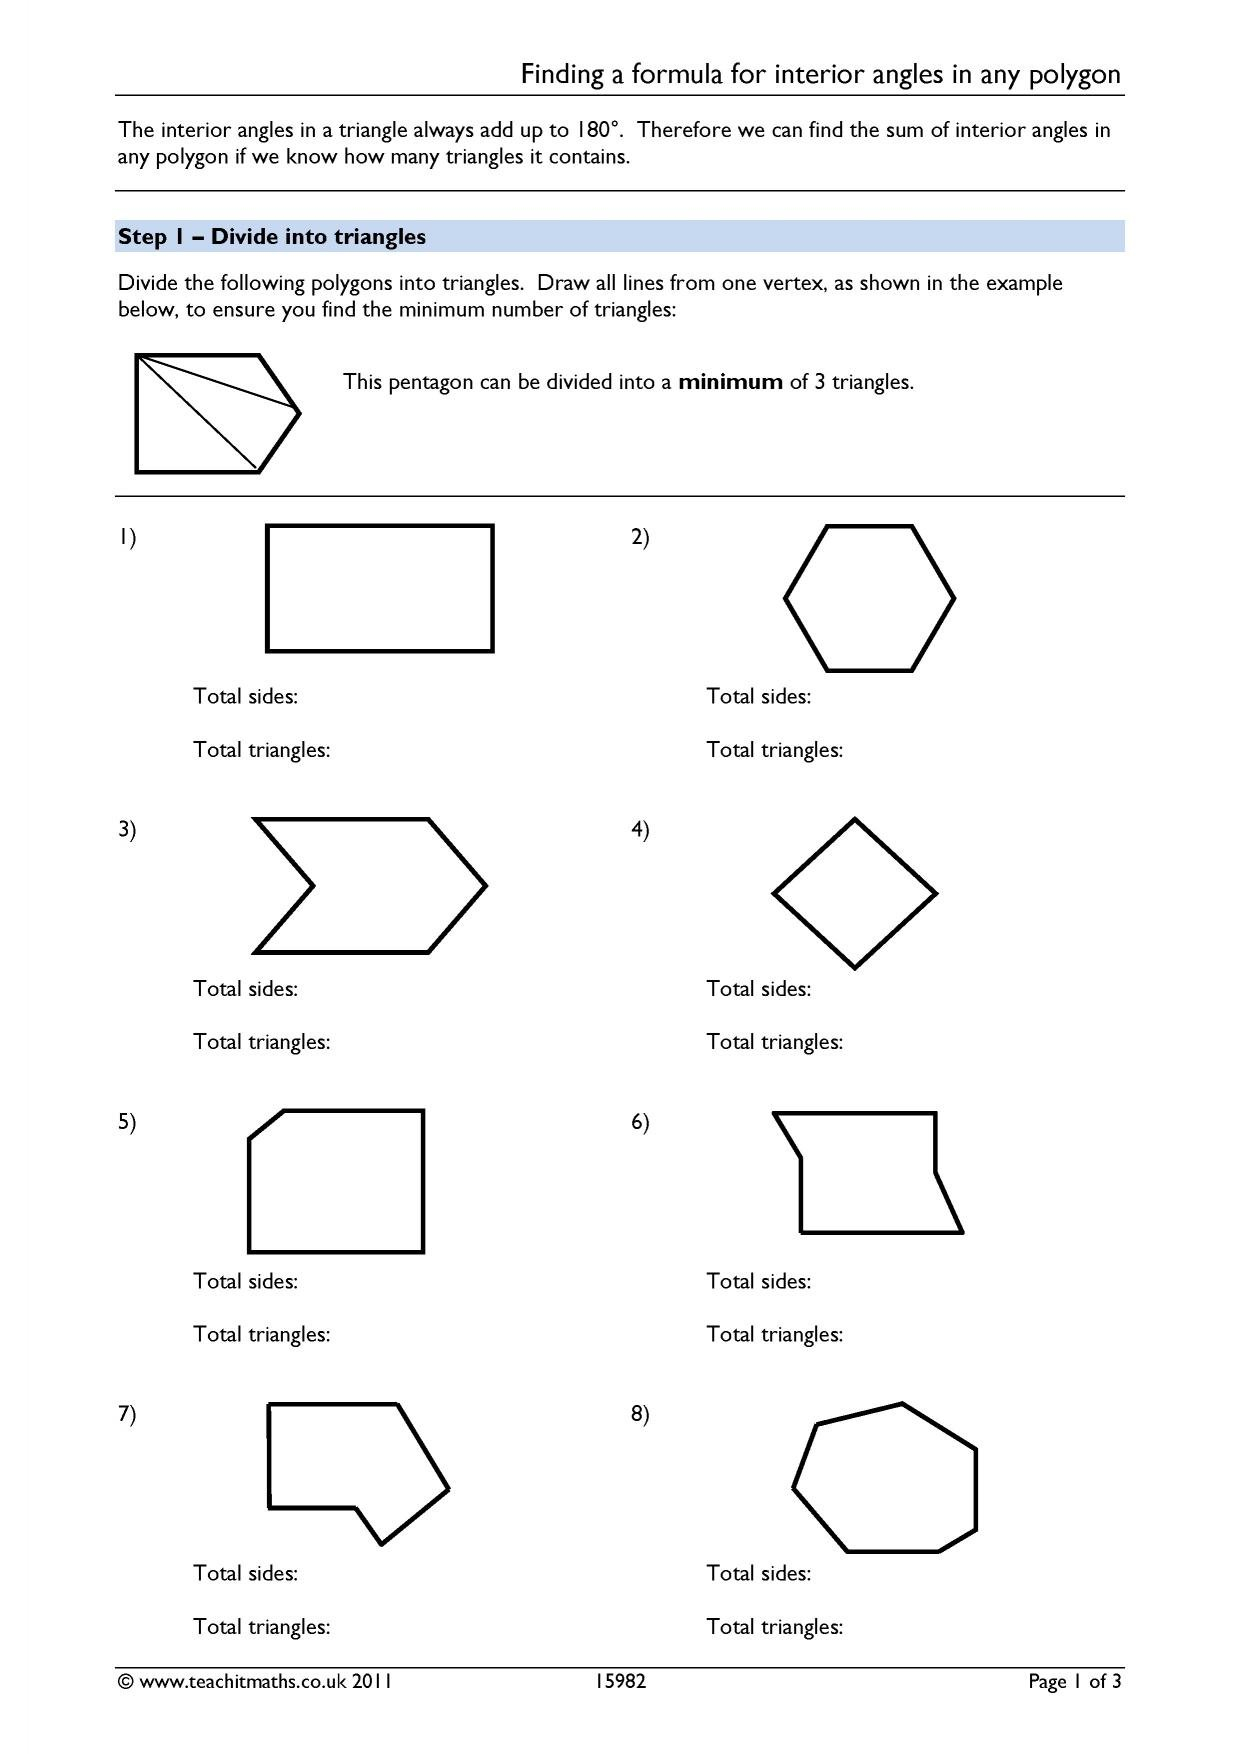 Finding A Formula For Interior Angles In Any Polygon With Angles In Polygons Worksheet Answers